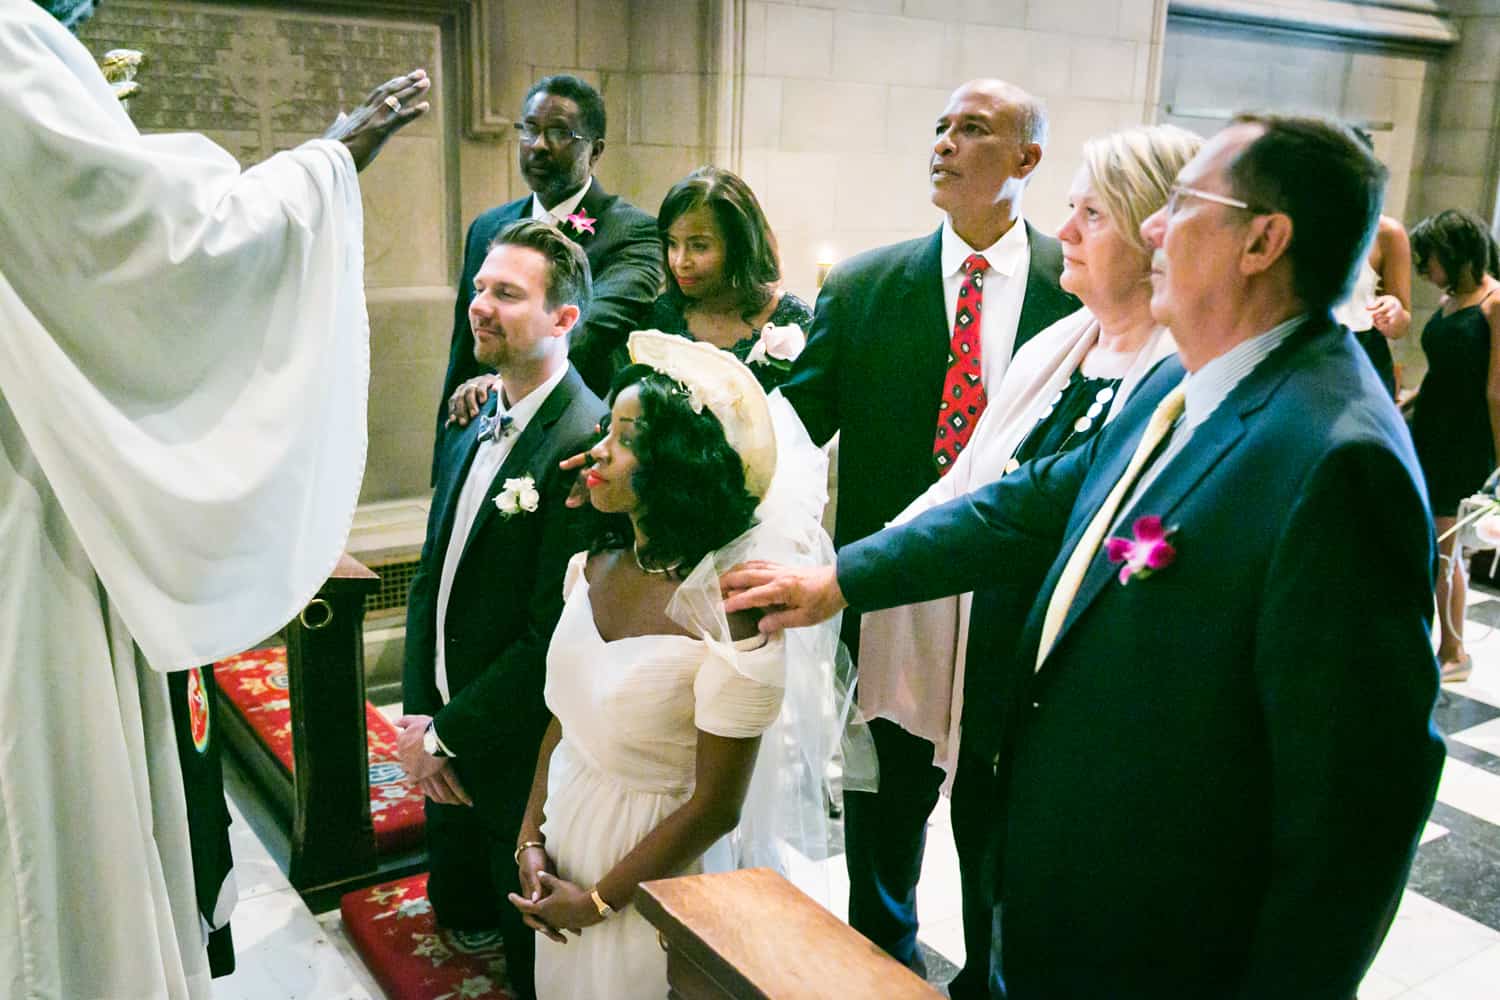 Guests with hands on bride and groom during Trinity Church wedding ceremony